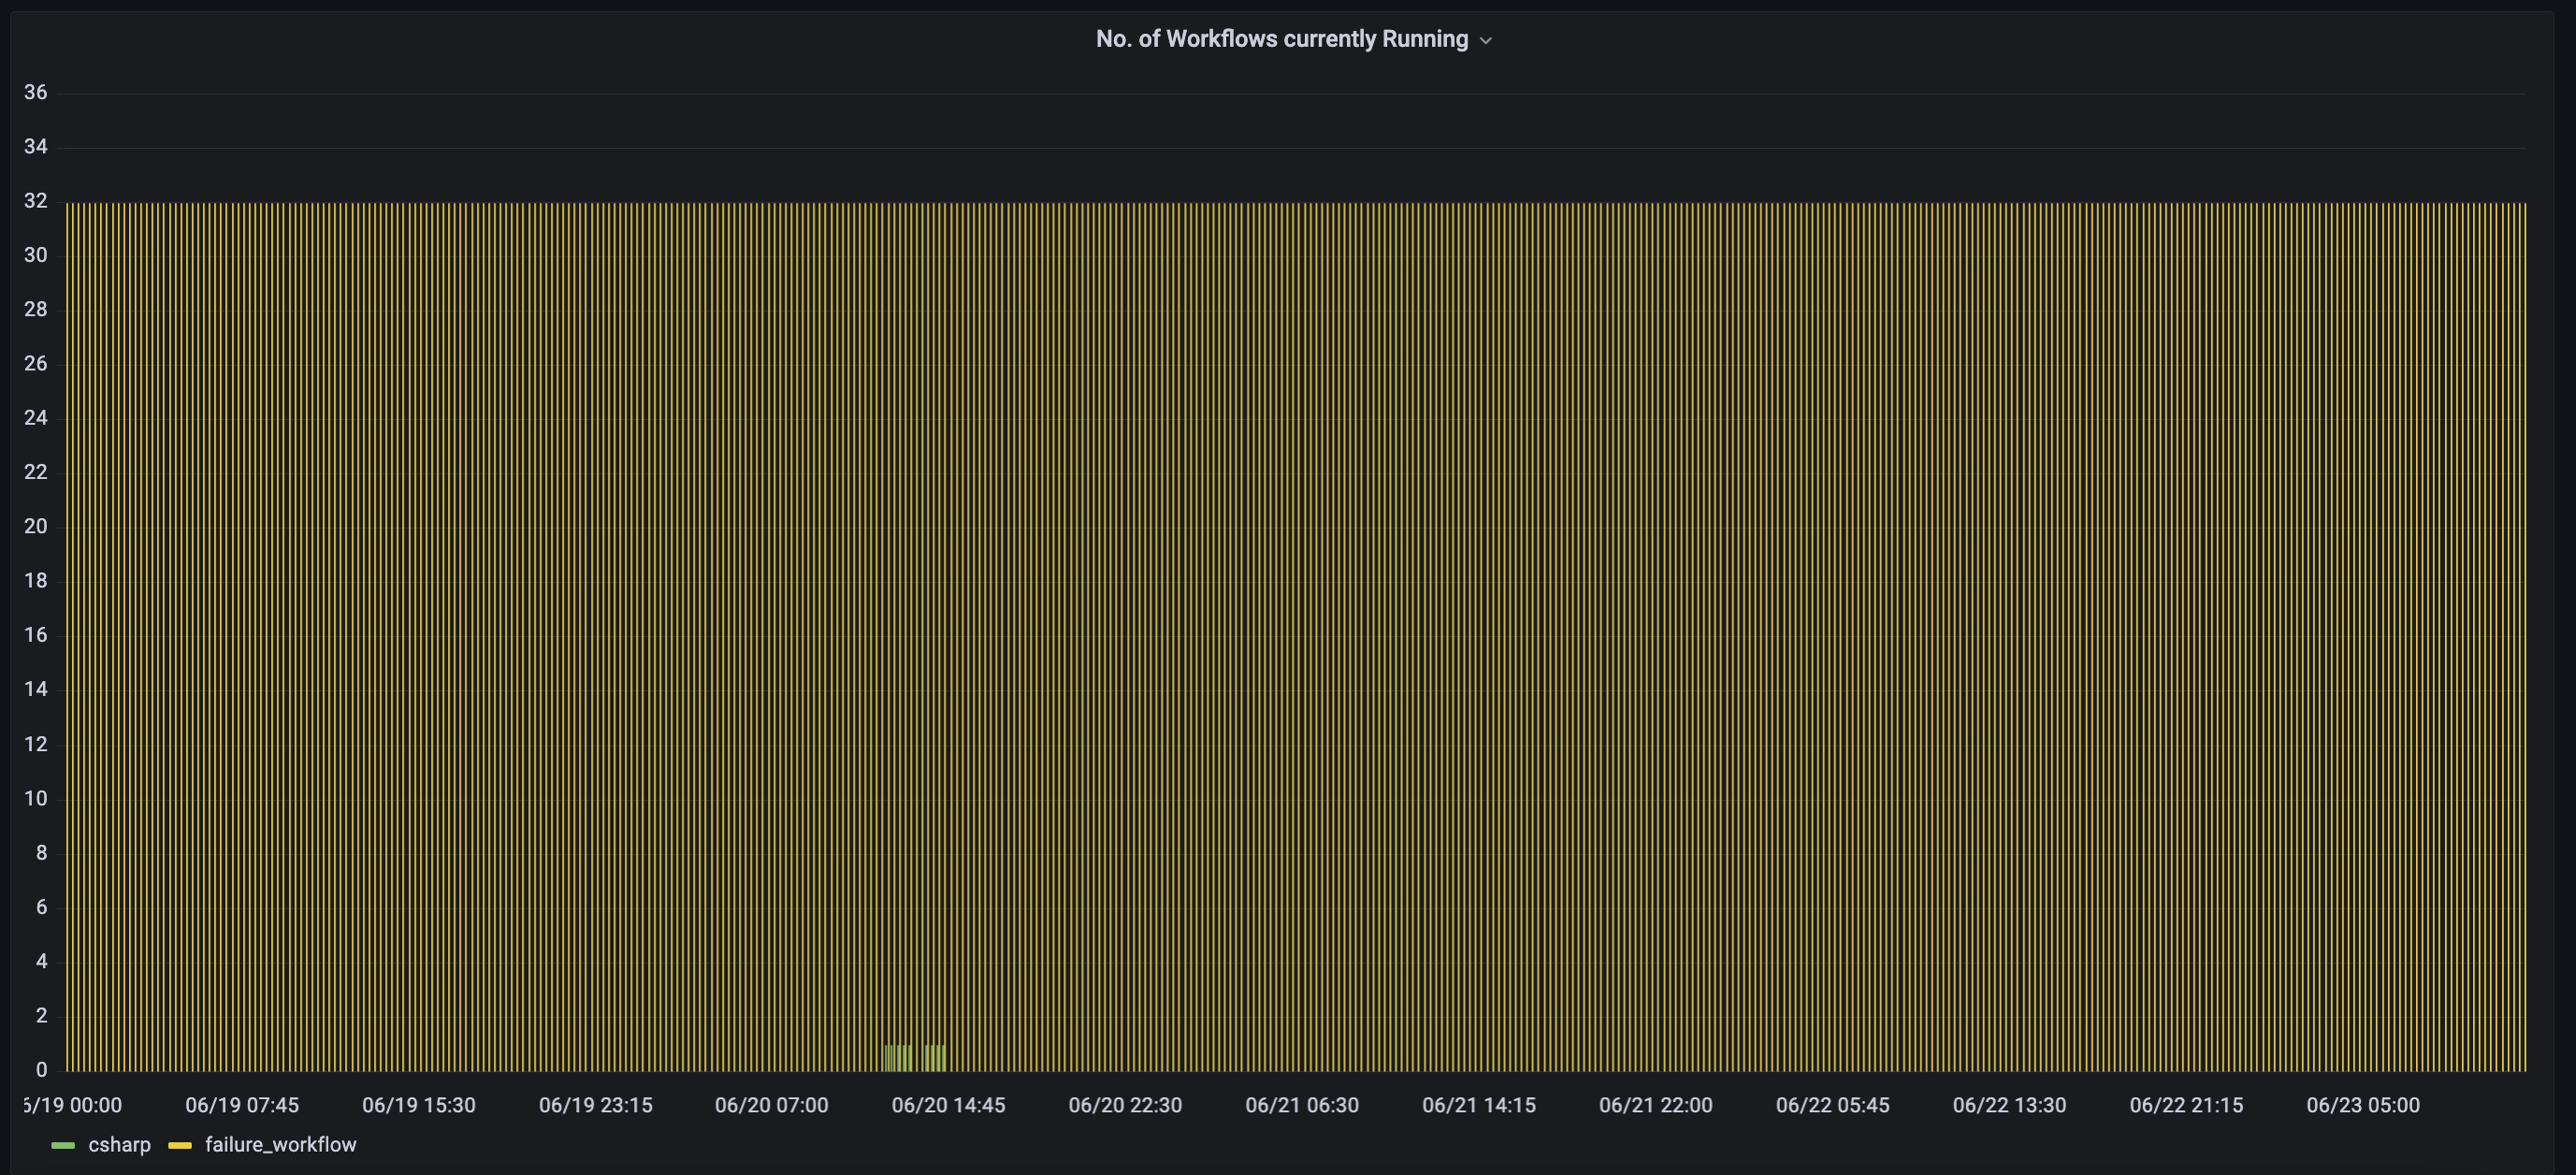 No of workflows currently running